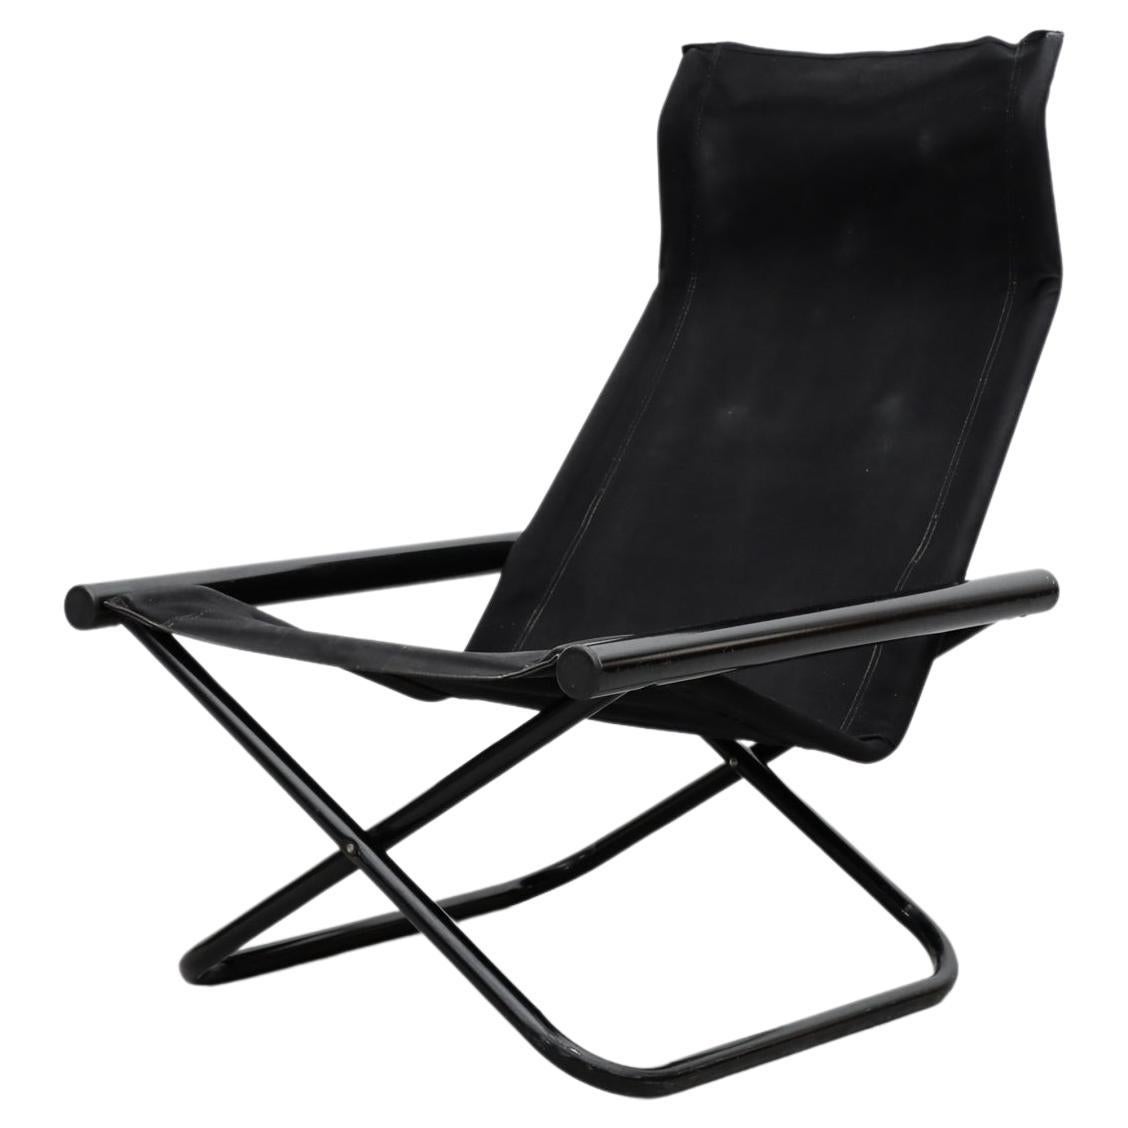 'NY' Folding Chair by Takeshi Nii